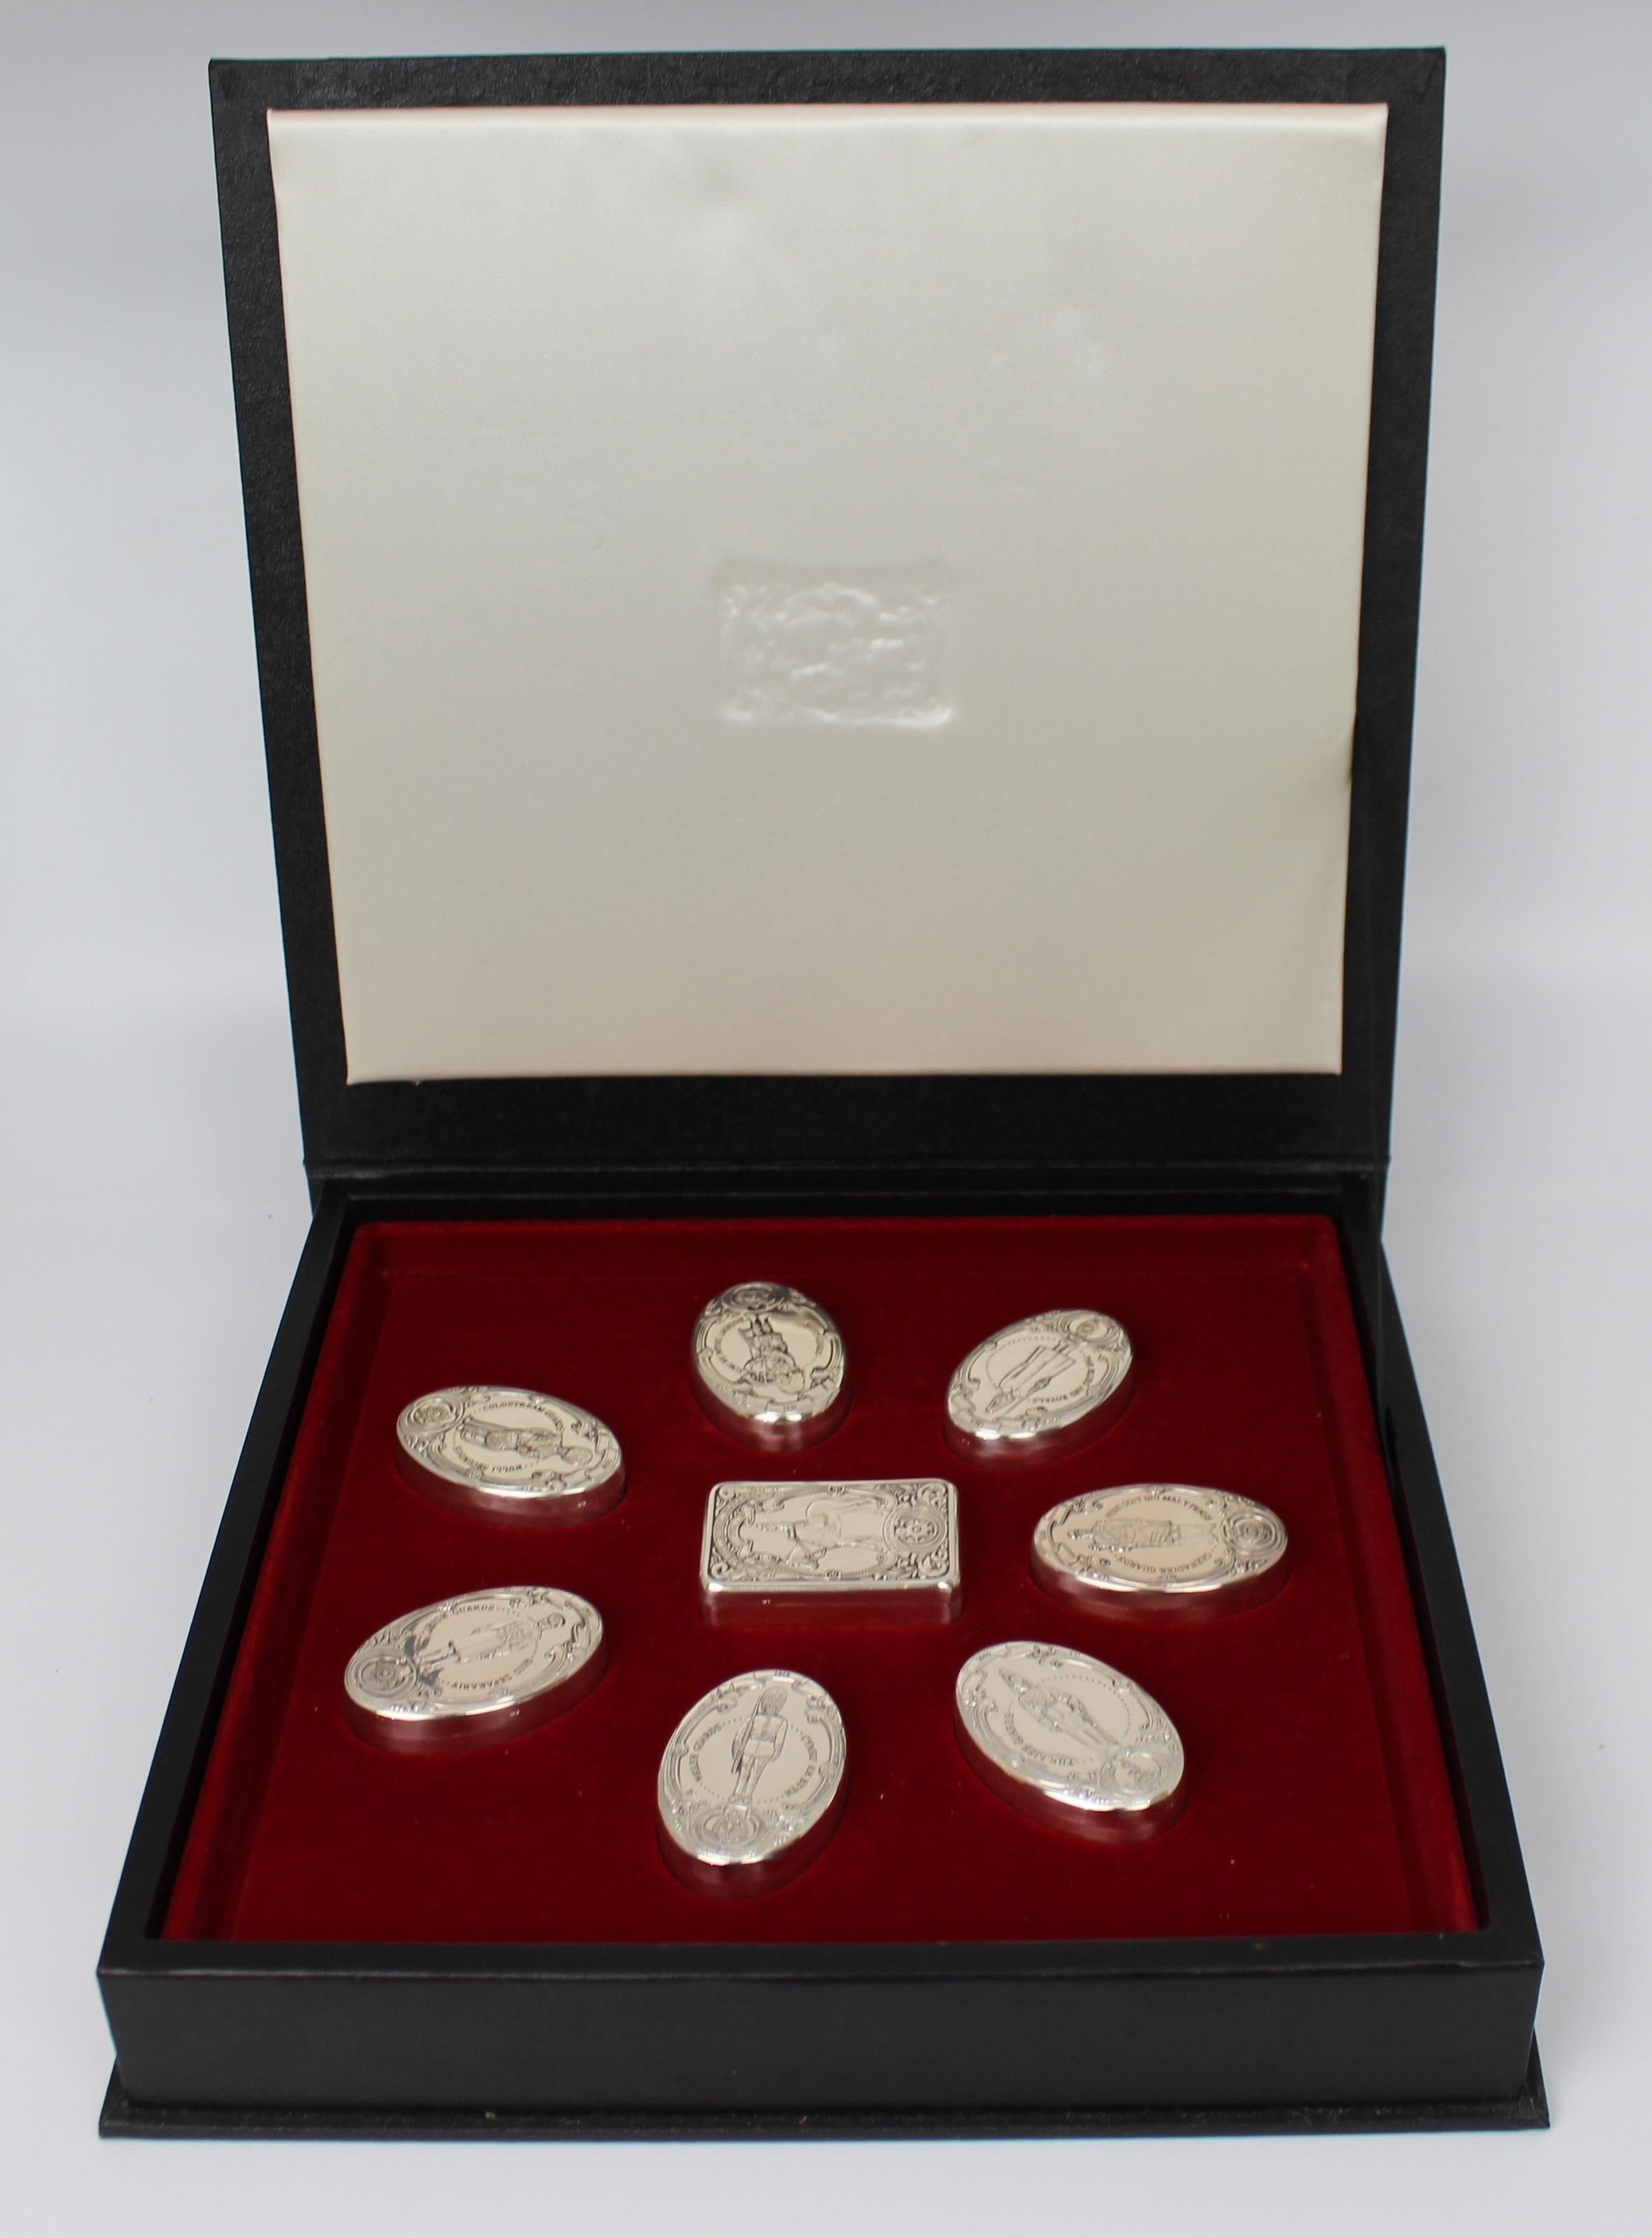 Cased Franklin mint solid silver box collection the Guards Regiments

Beautiful quality collectors case of sterling silver boxes. Issued in a limited edition by The Franklin MInt in tribute to the 25th anniversary of the coronation of Her Majesty